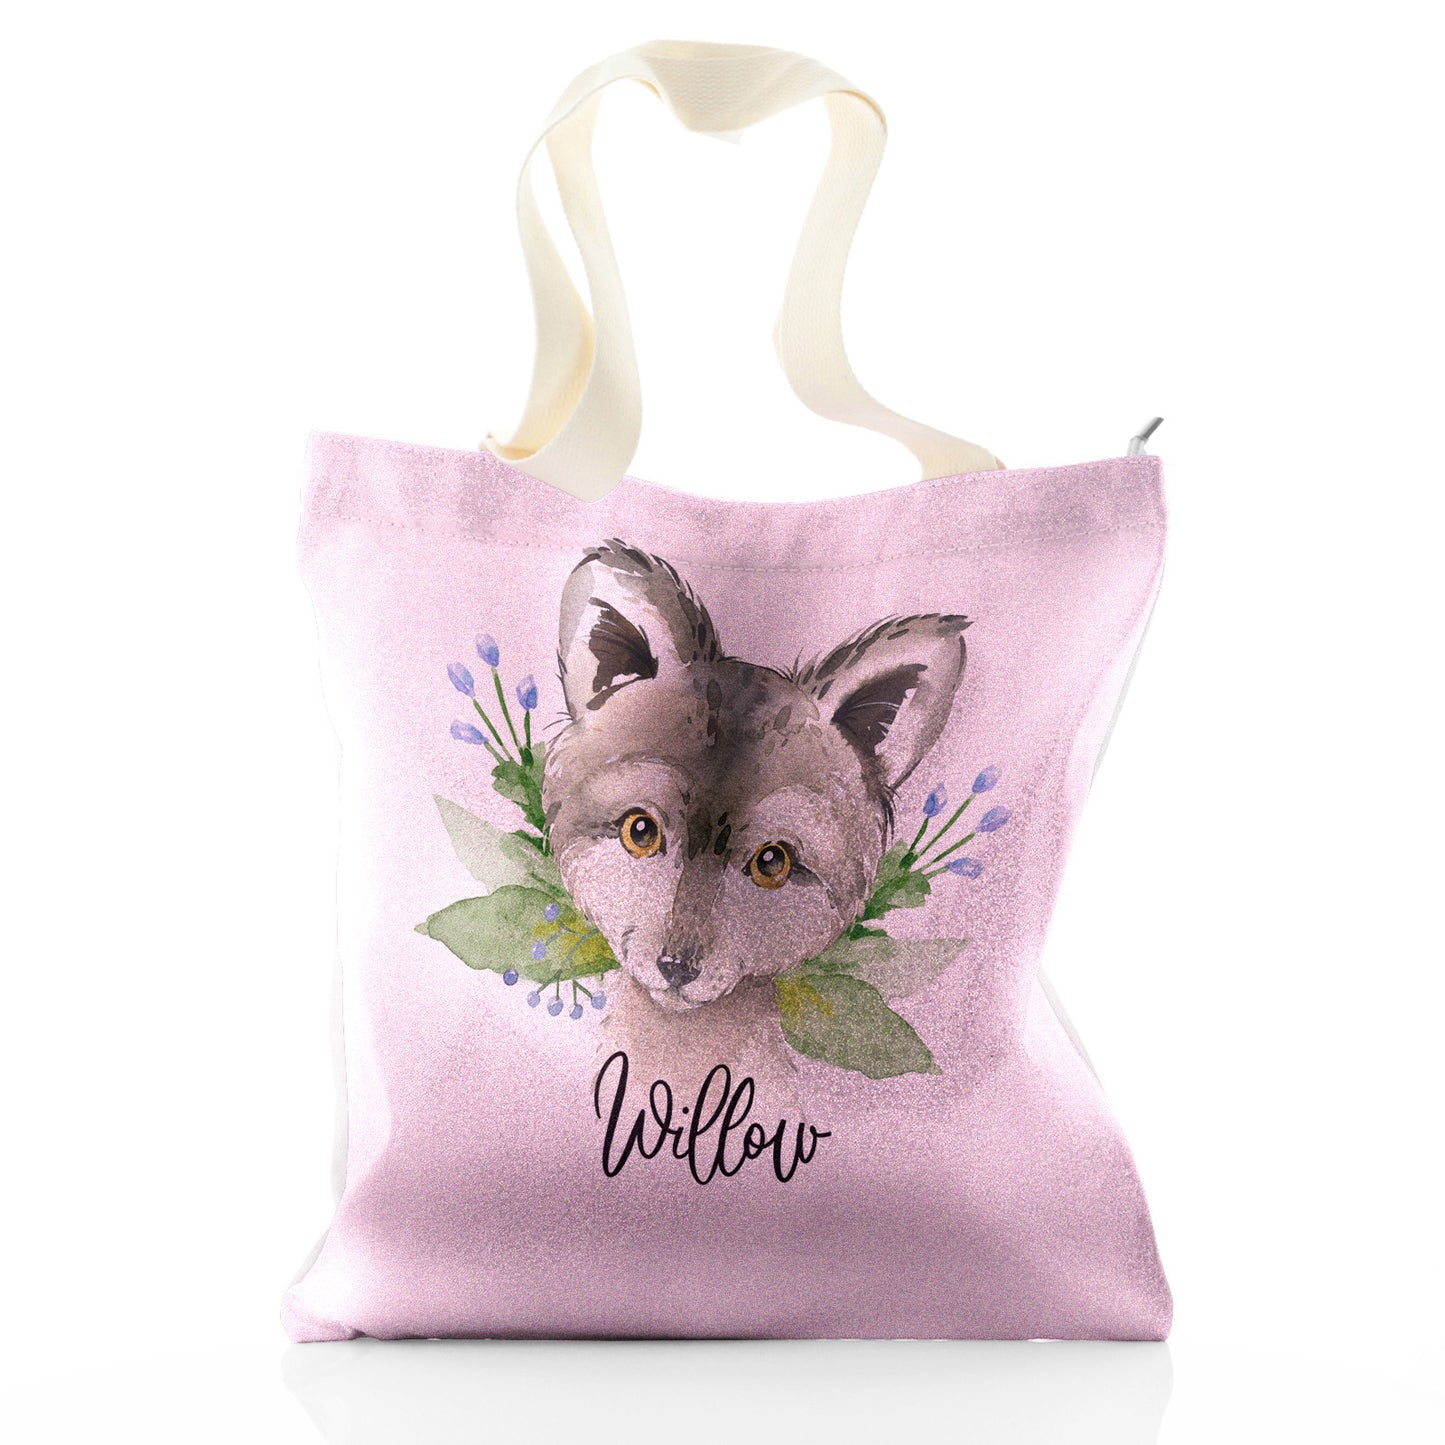 Personalised Glitter Tote Bag with Grey Wolf Blue Flowers and Cute Text